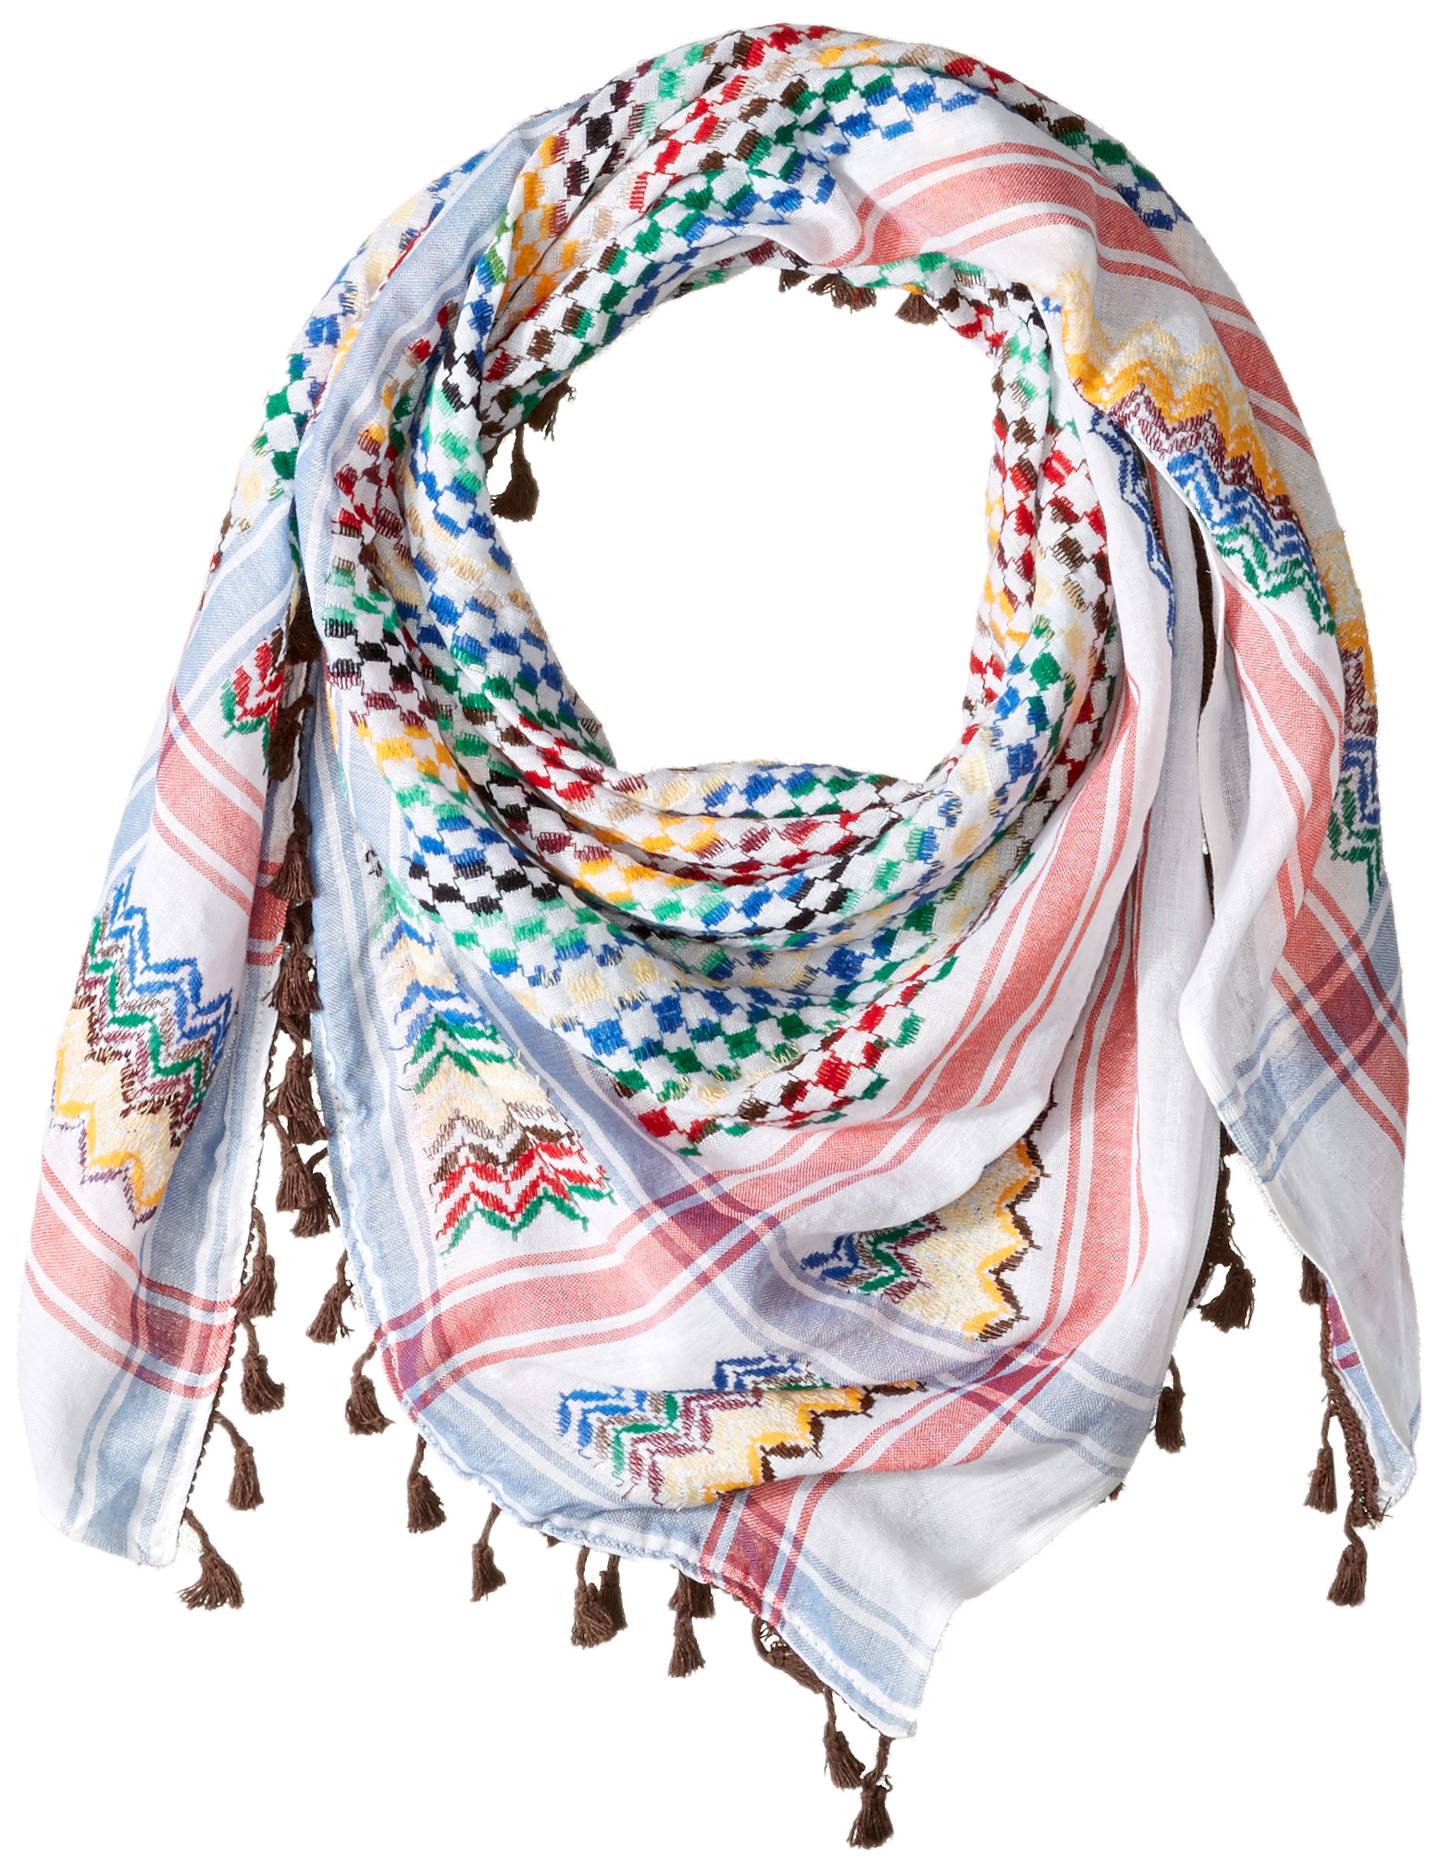 Hirbawi creates scarves in an ever-increasing variety of colors.  Photo: Hirbawi USA